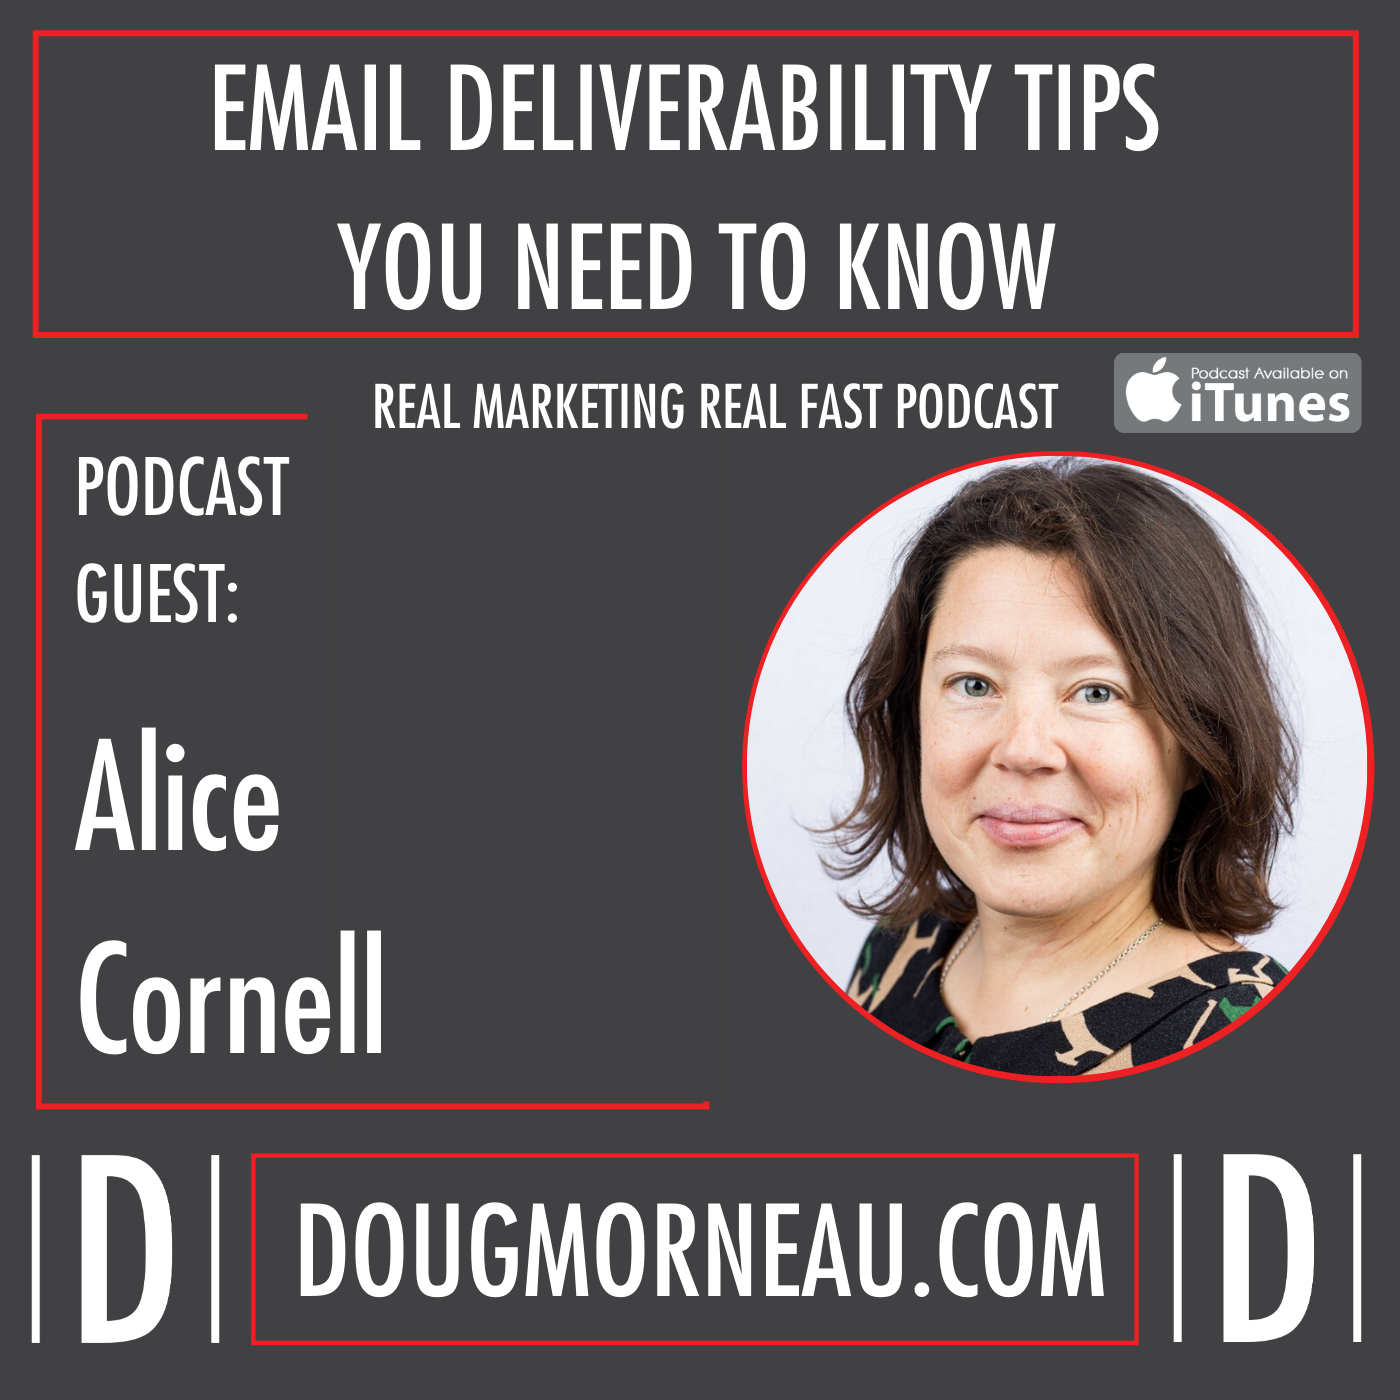 ALICE CORNELL - EMAIL DELIVERABILITY TIPS YOU NEED TO KNOW - DOUG MORNEAU - REAL MARKETING REAL FAST PODCAST